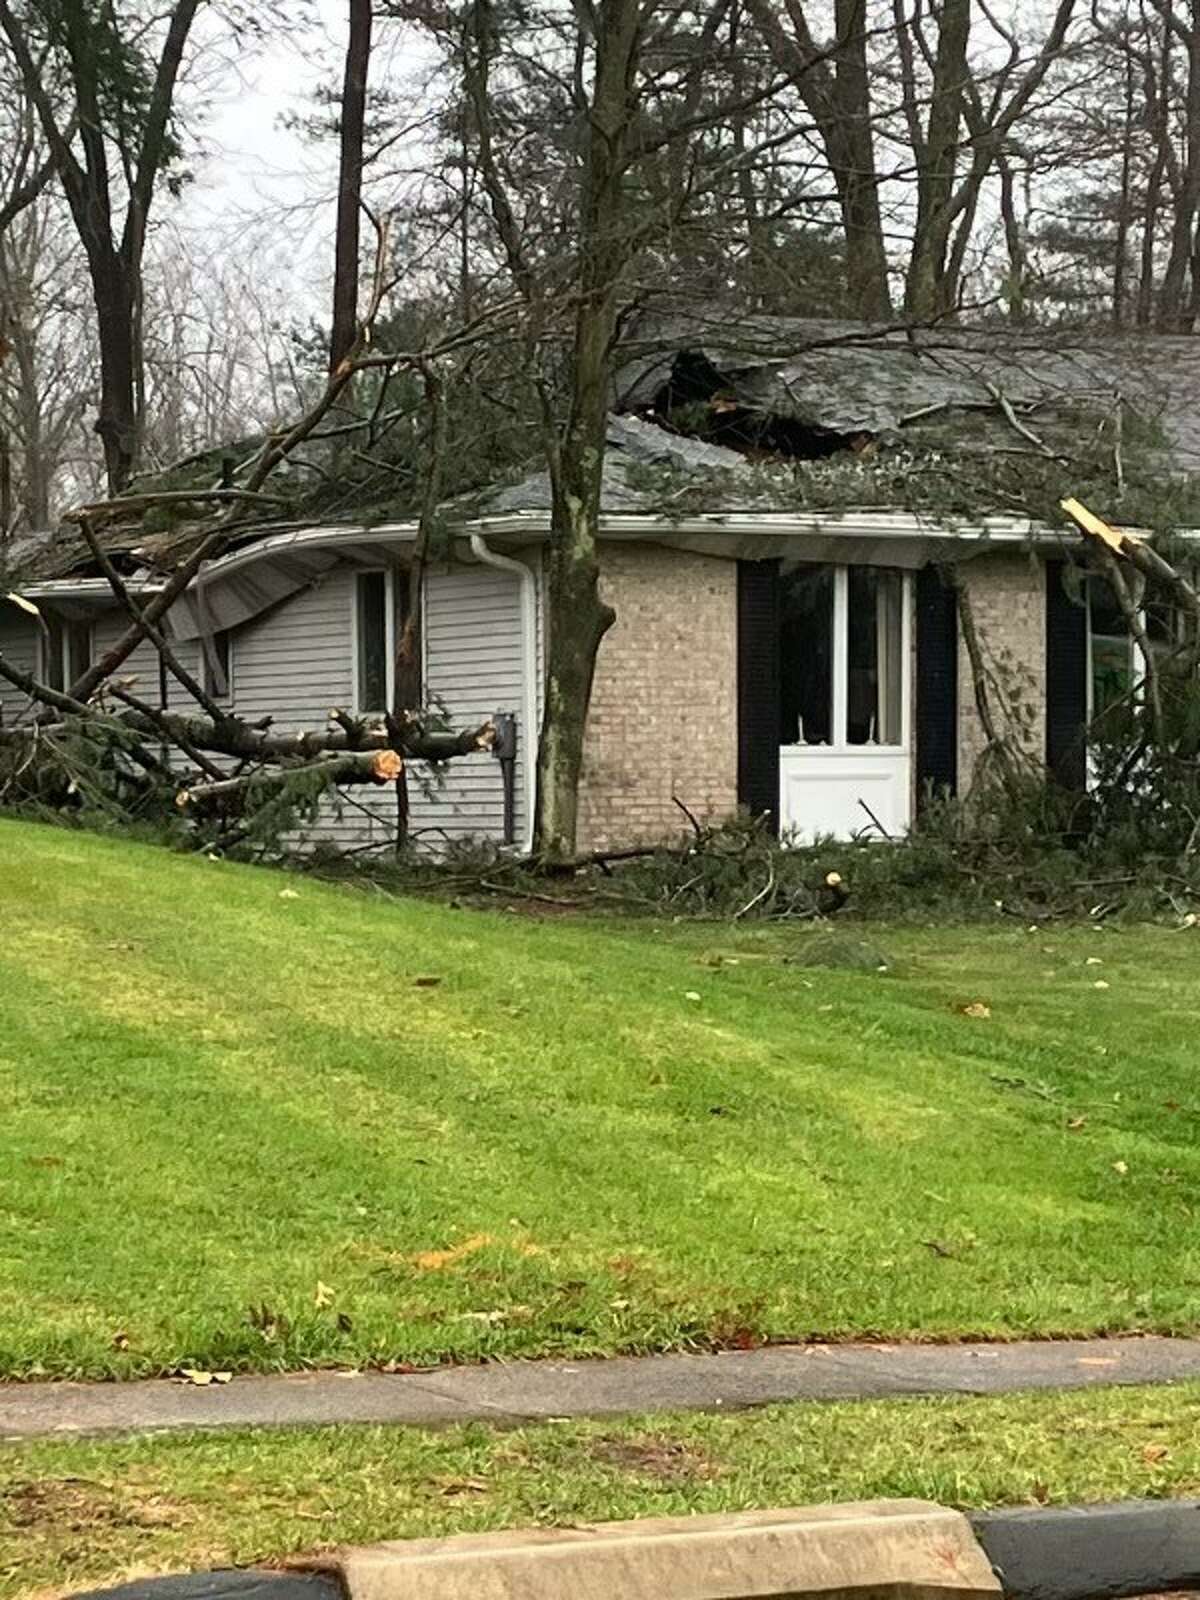 A tree fell and damaged a home on Berle Road in South Windsor as high winds and heavy rains swept across Connecticut Friday. No one was injured.